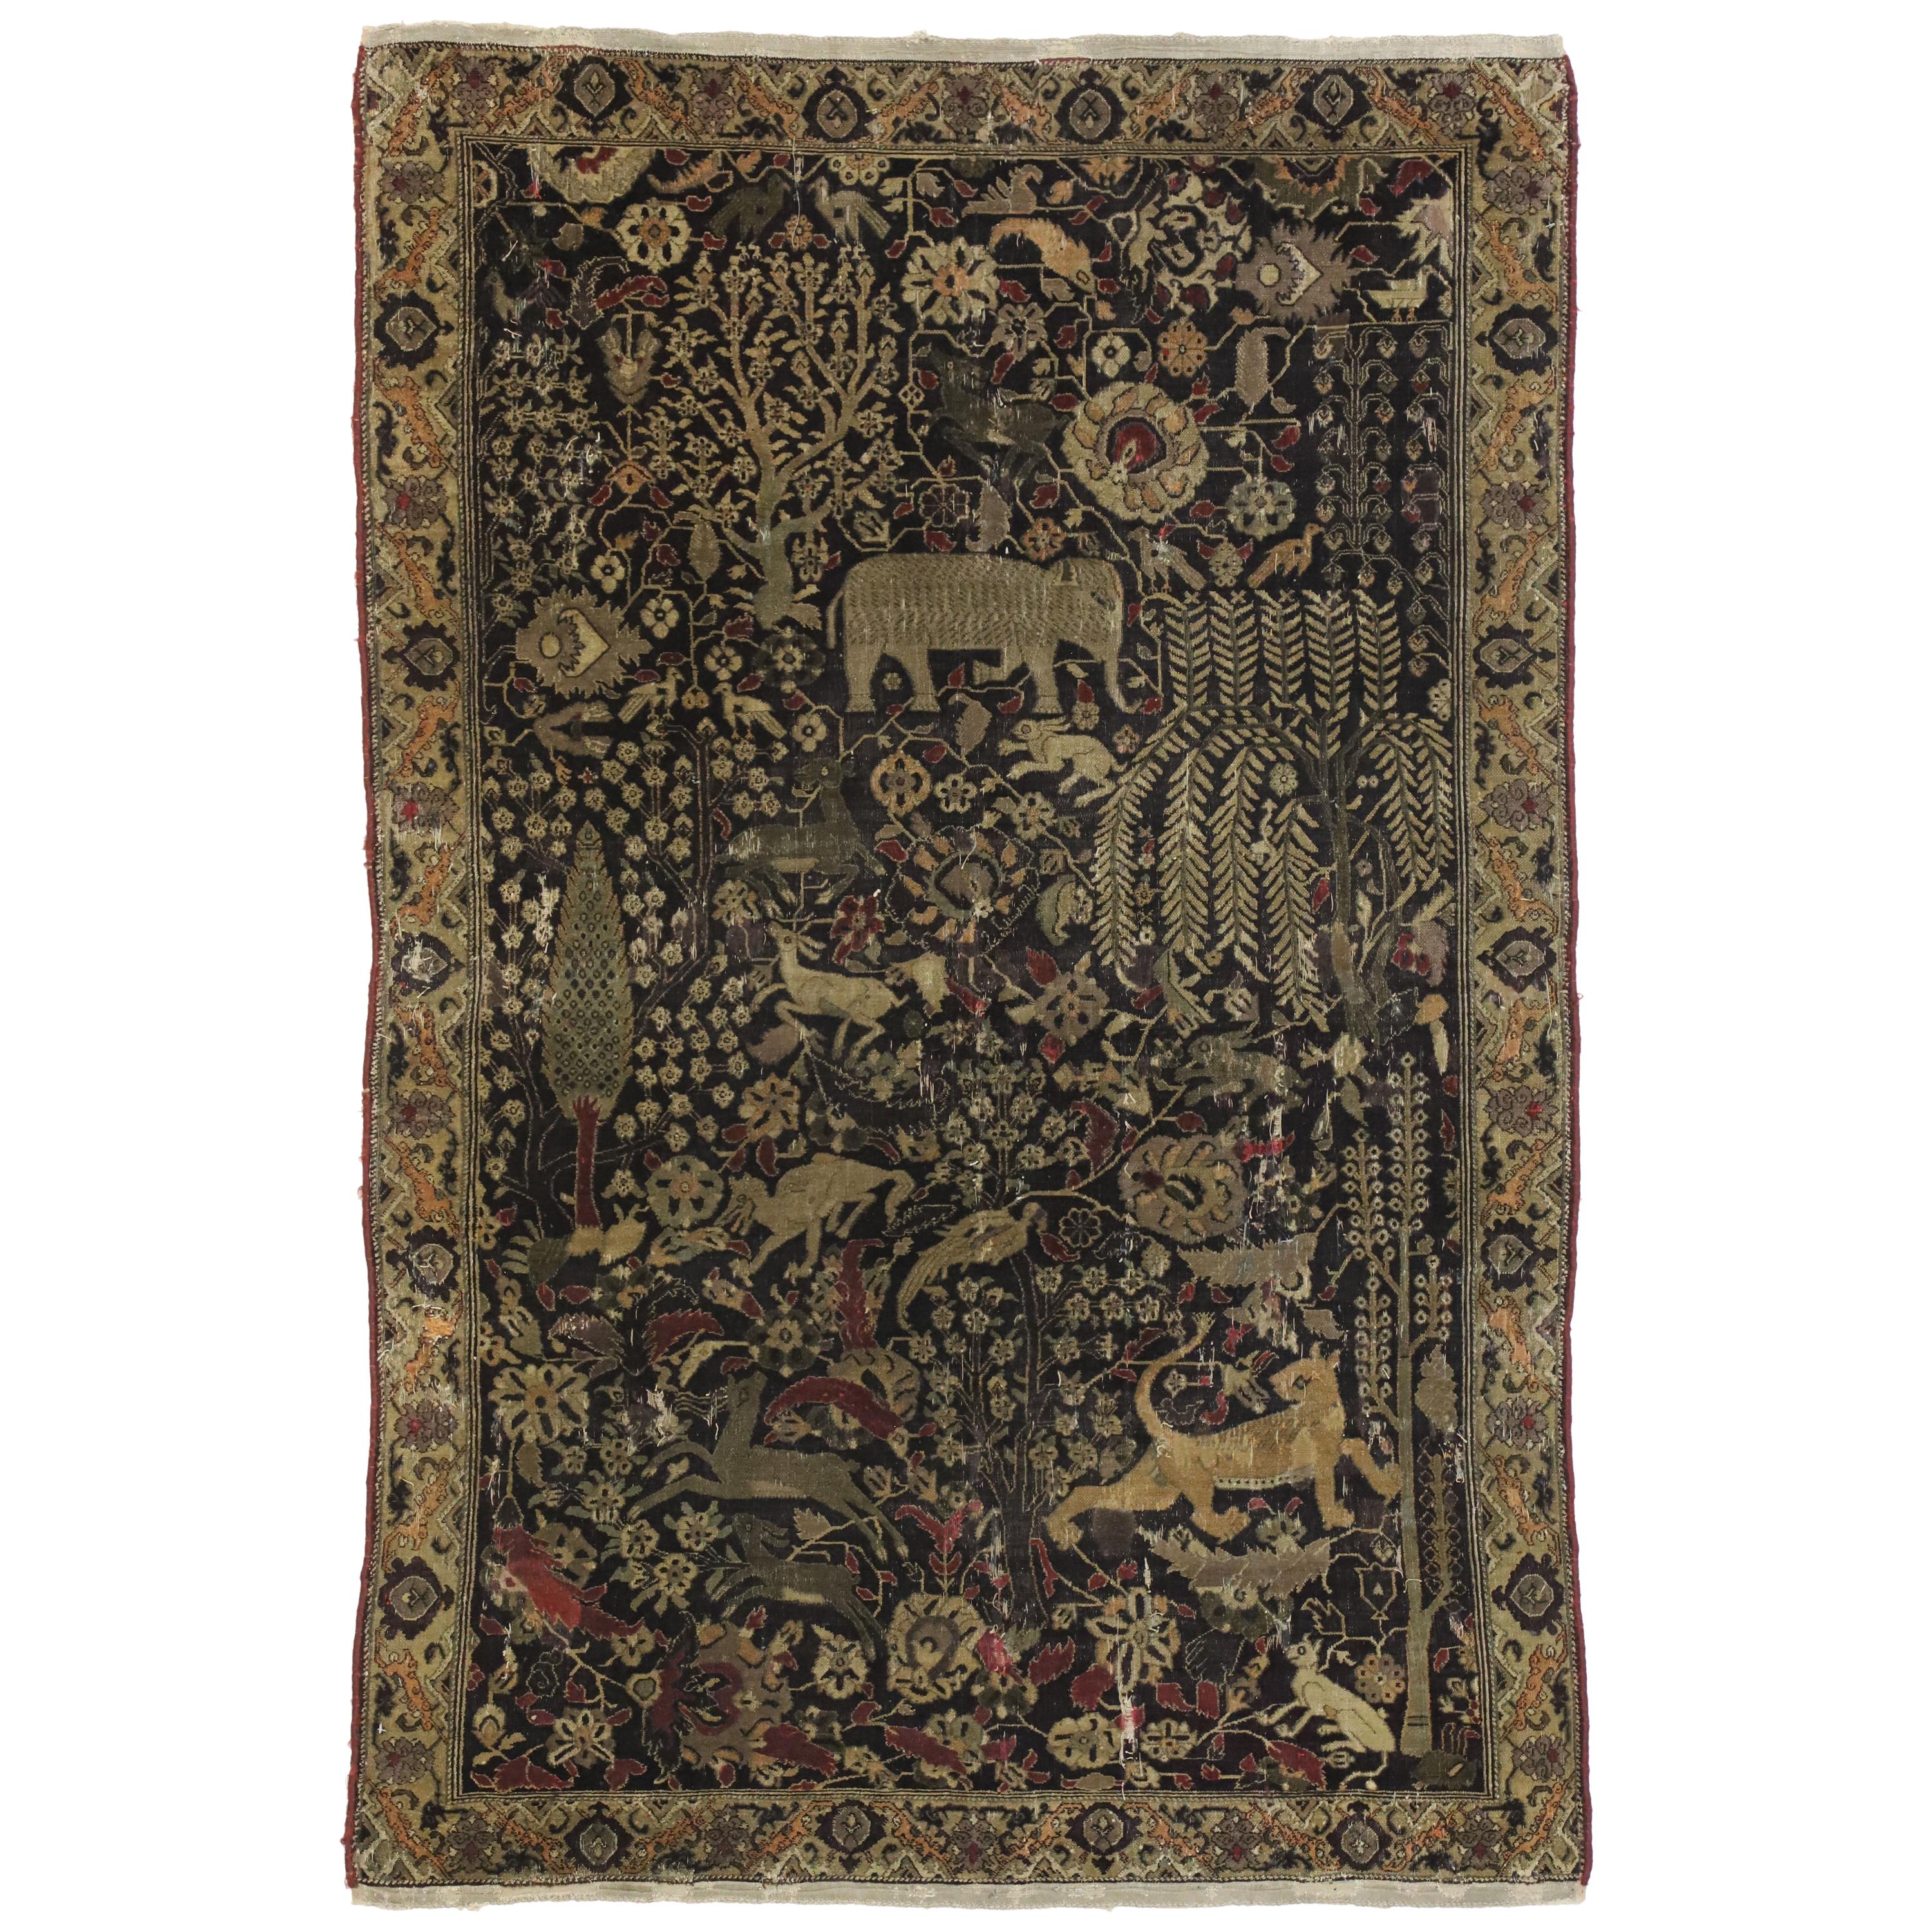 Late 19th Century Medieval Distressed Antique Indian Agra Rug with Hunting Scene